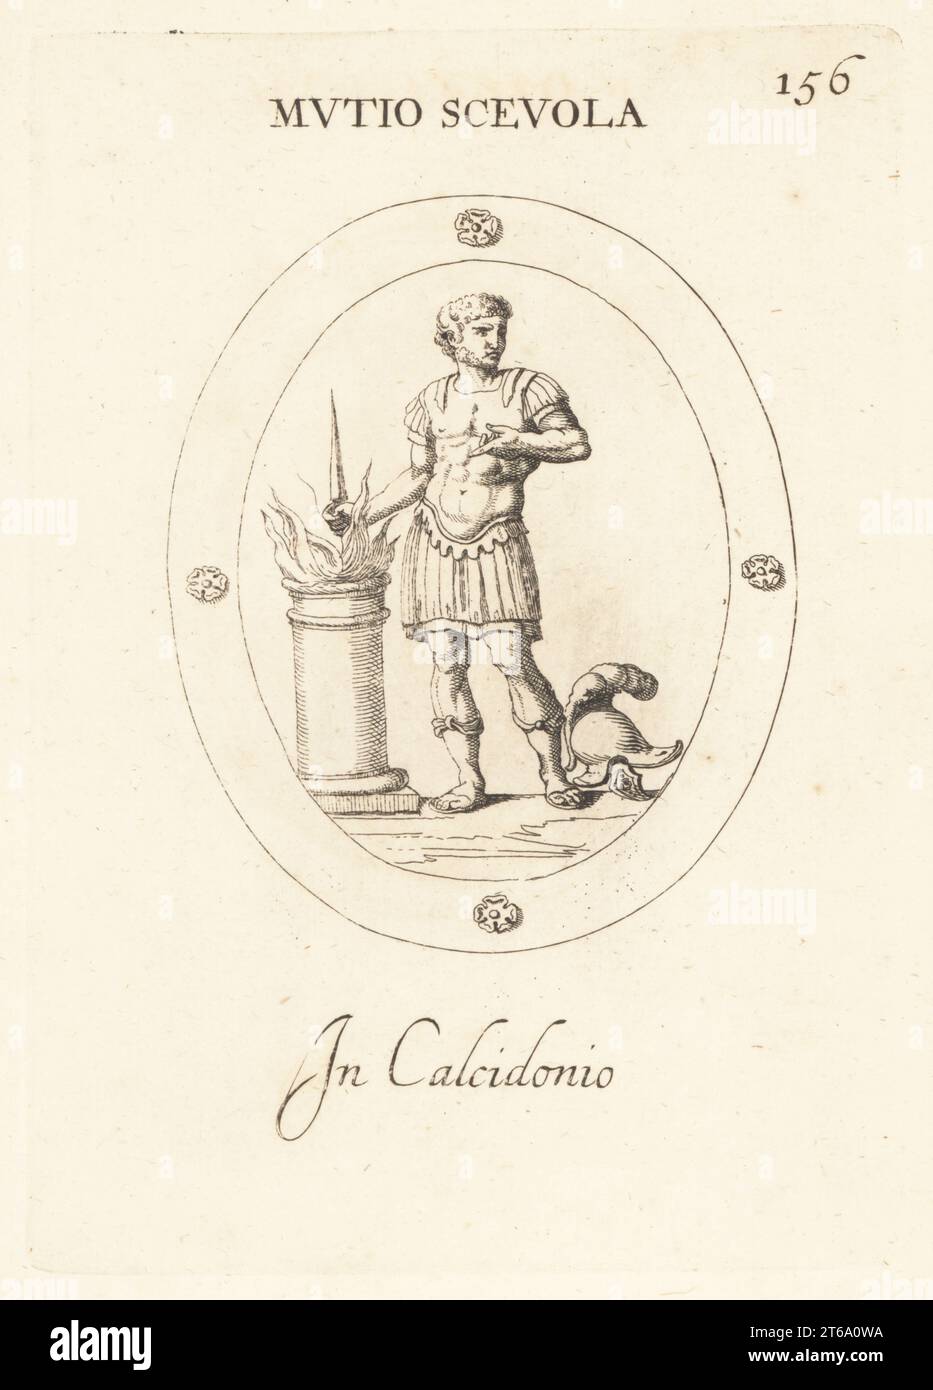 Roman youth Gaius Mucius Scaevola putting his hand in the flame before Etruscan king Lars Porsena, 500BC. Soldier in breastplate, leather armour skirts, with his right hand in an altar flame. Helmet on ground. In chalcedony. Mutio Scevola. In calcidonio. Copperplate engraving by Giovanni Battista Galestruzzi after Leonardo Agostini from Gemmae et Sculpturae Antiquae Depicti ab Leonardo Augustino Senesi, Abraham Blooteling, Amsterdam, 1685. Stock Photo